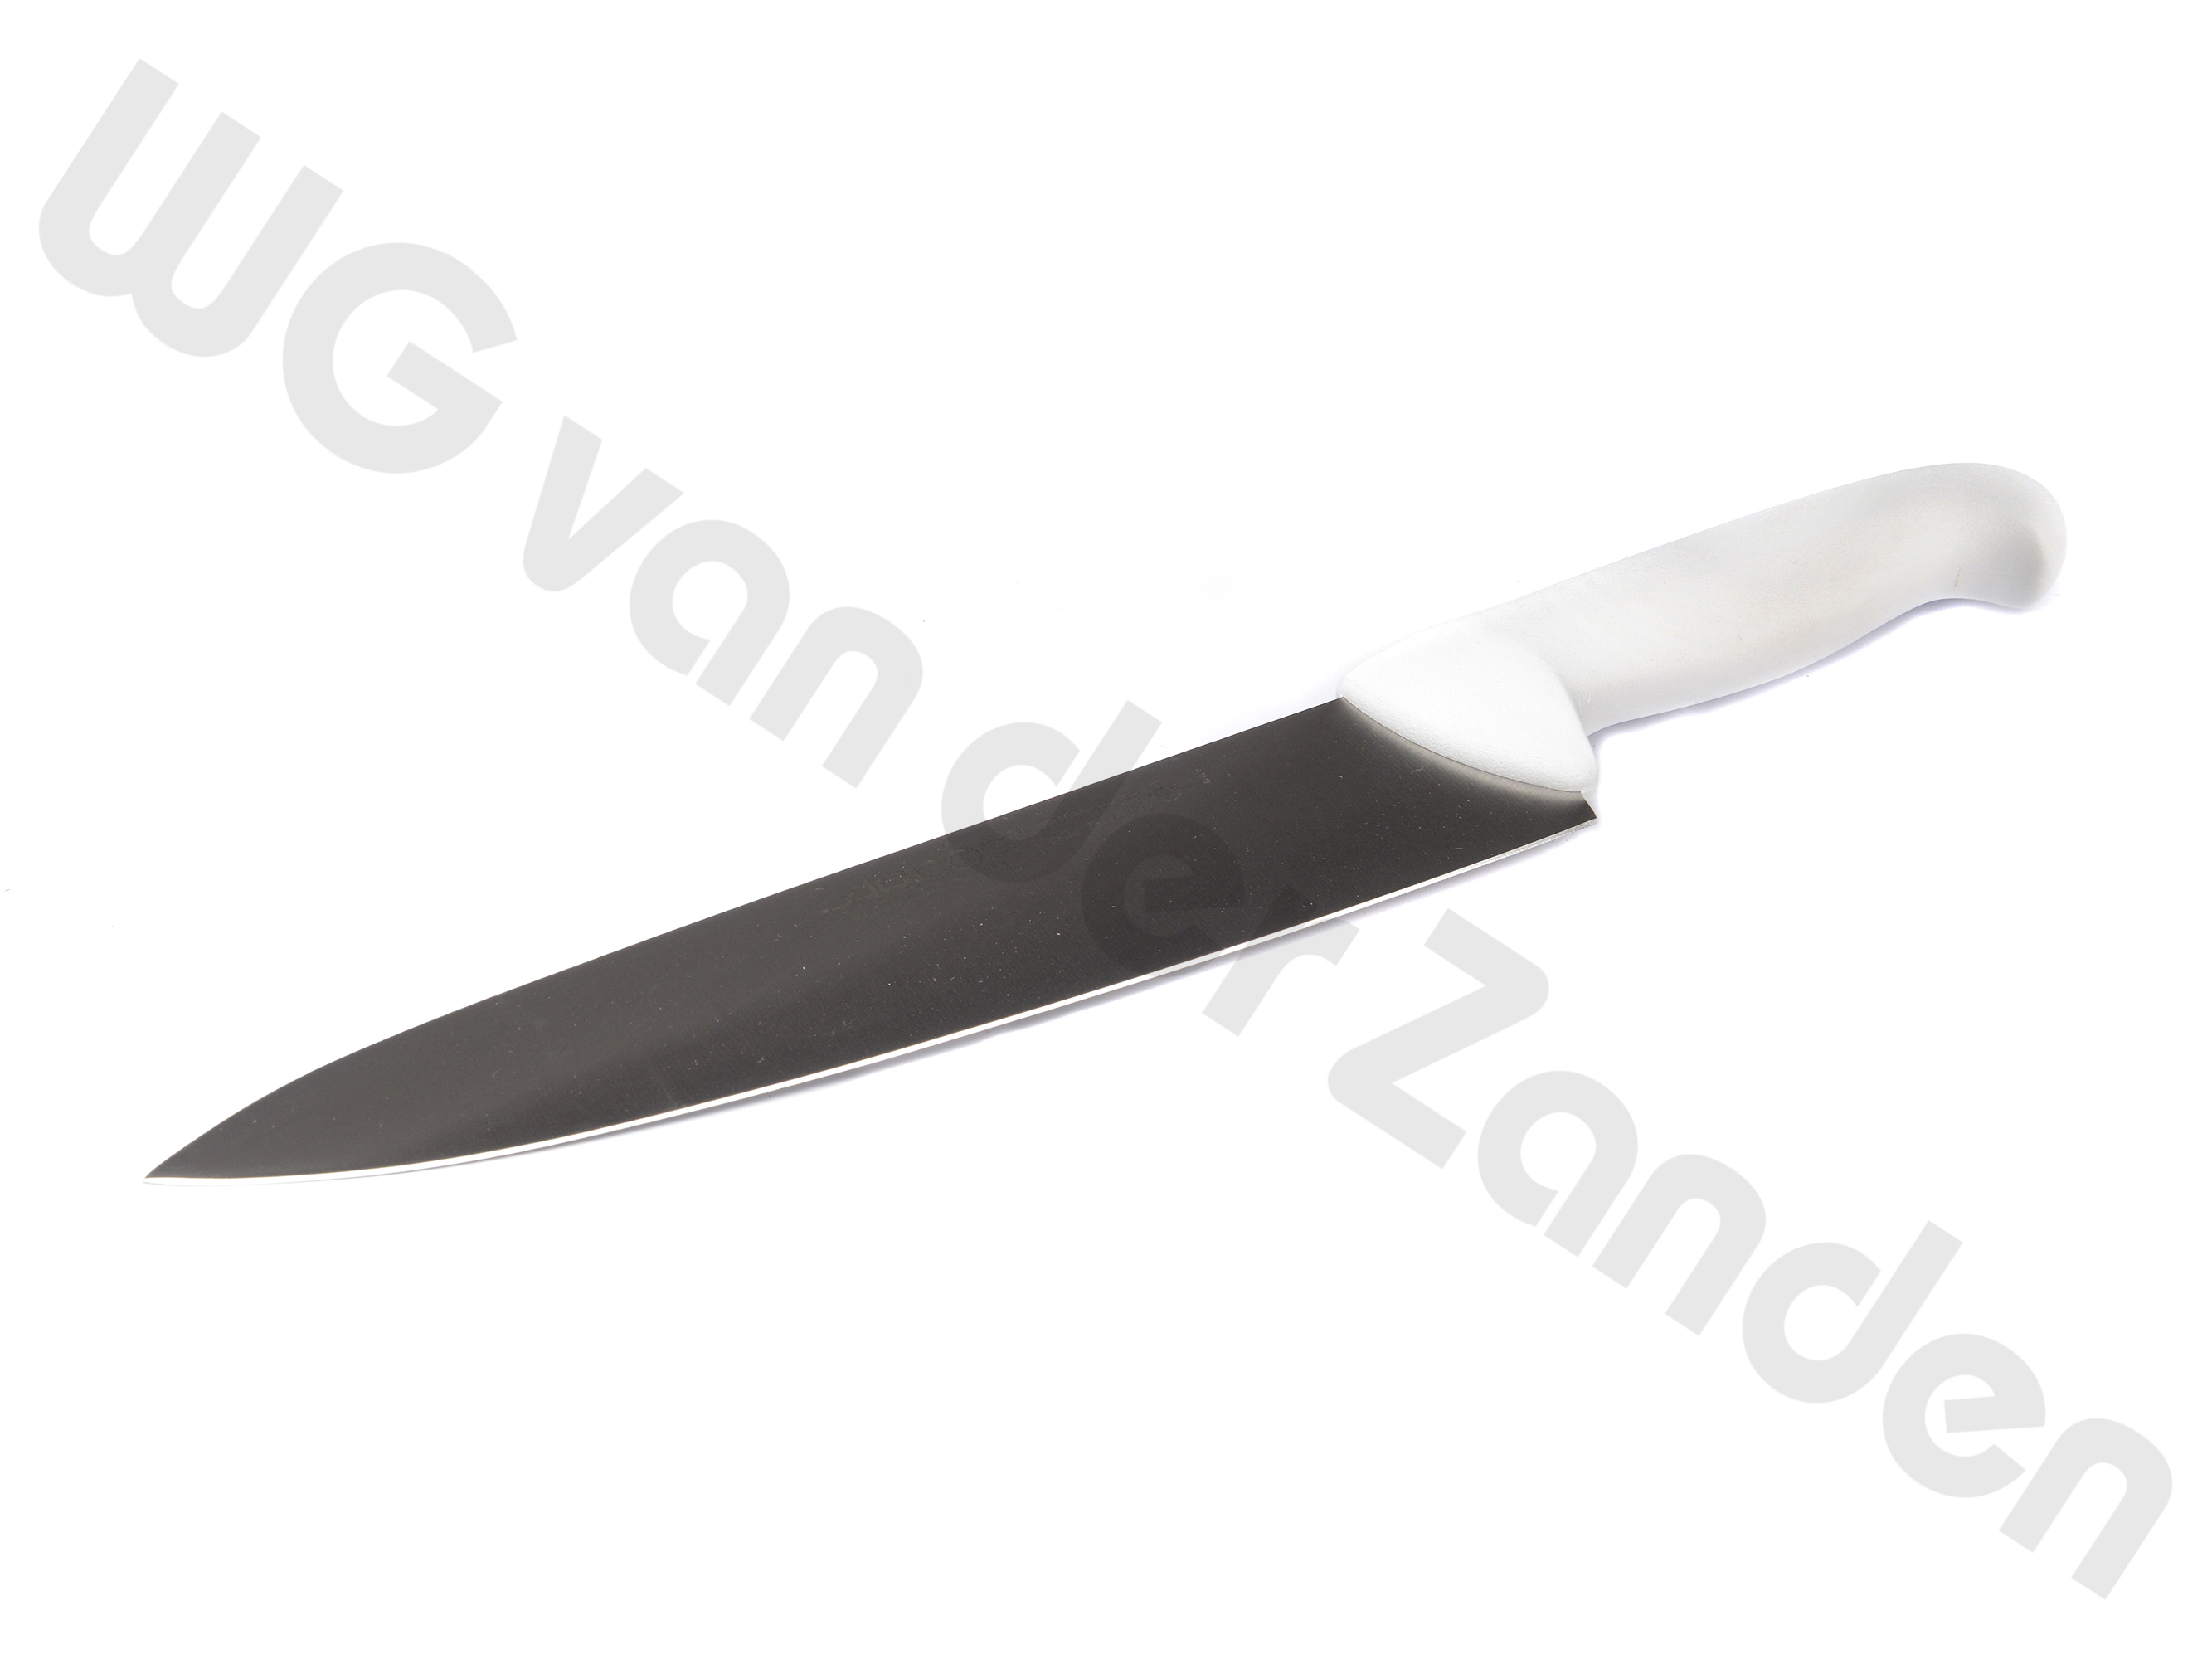 551655 COOKS KNIFE 25CM WHITE HANDLE ARCOS